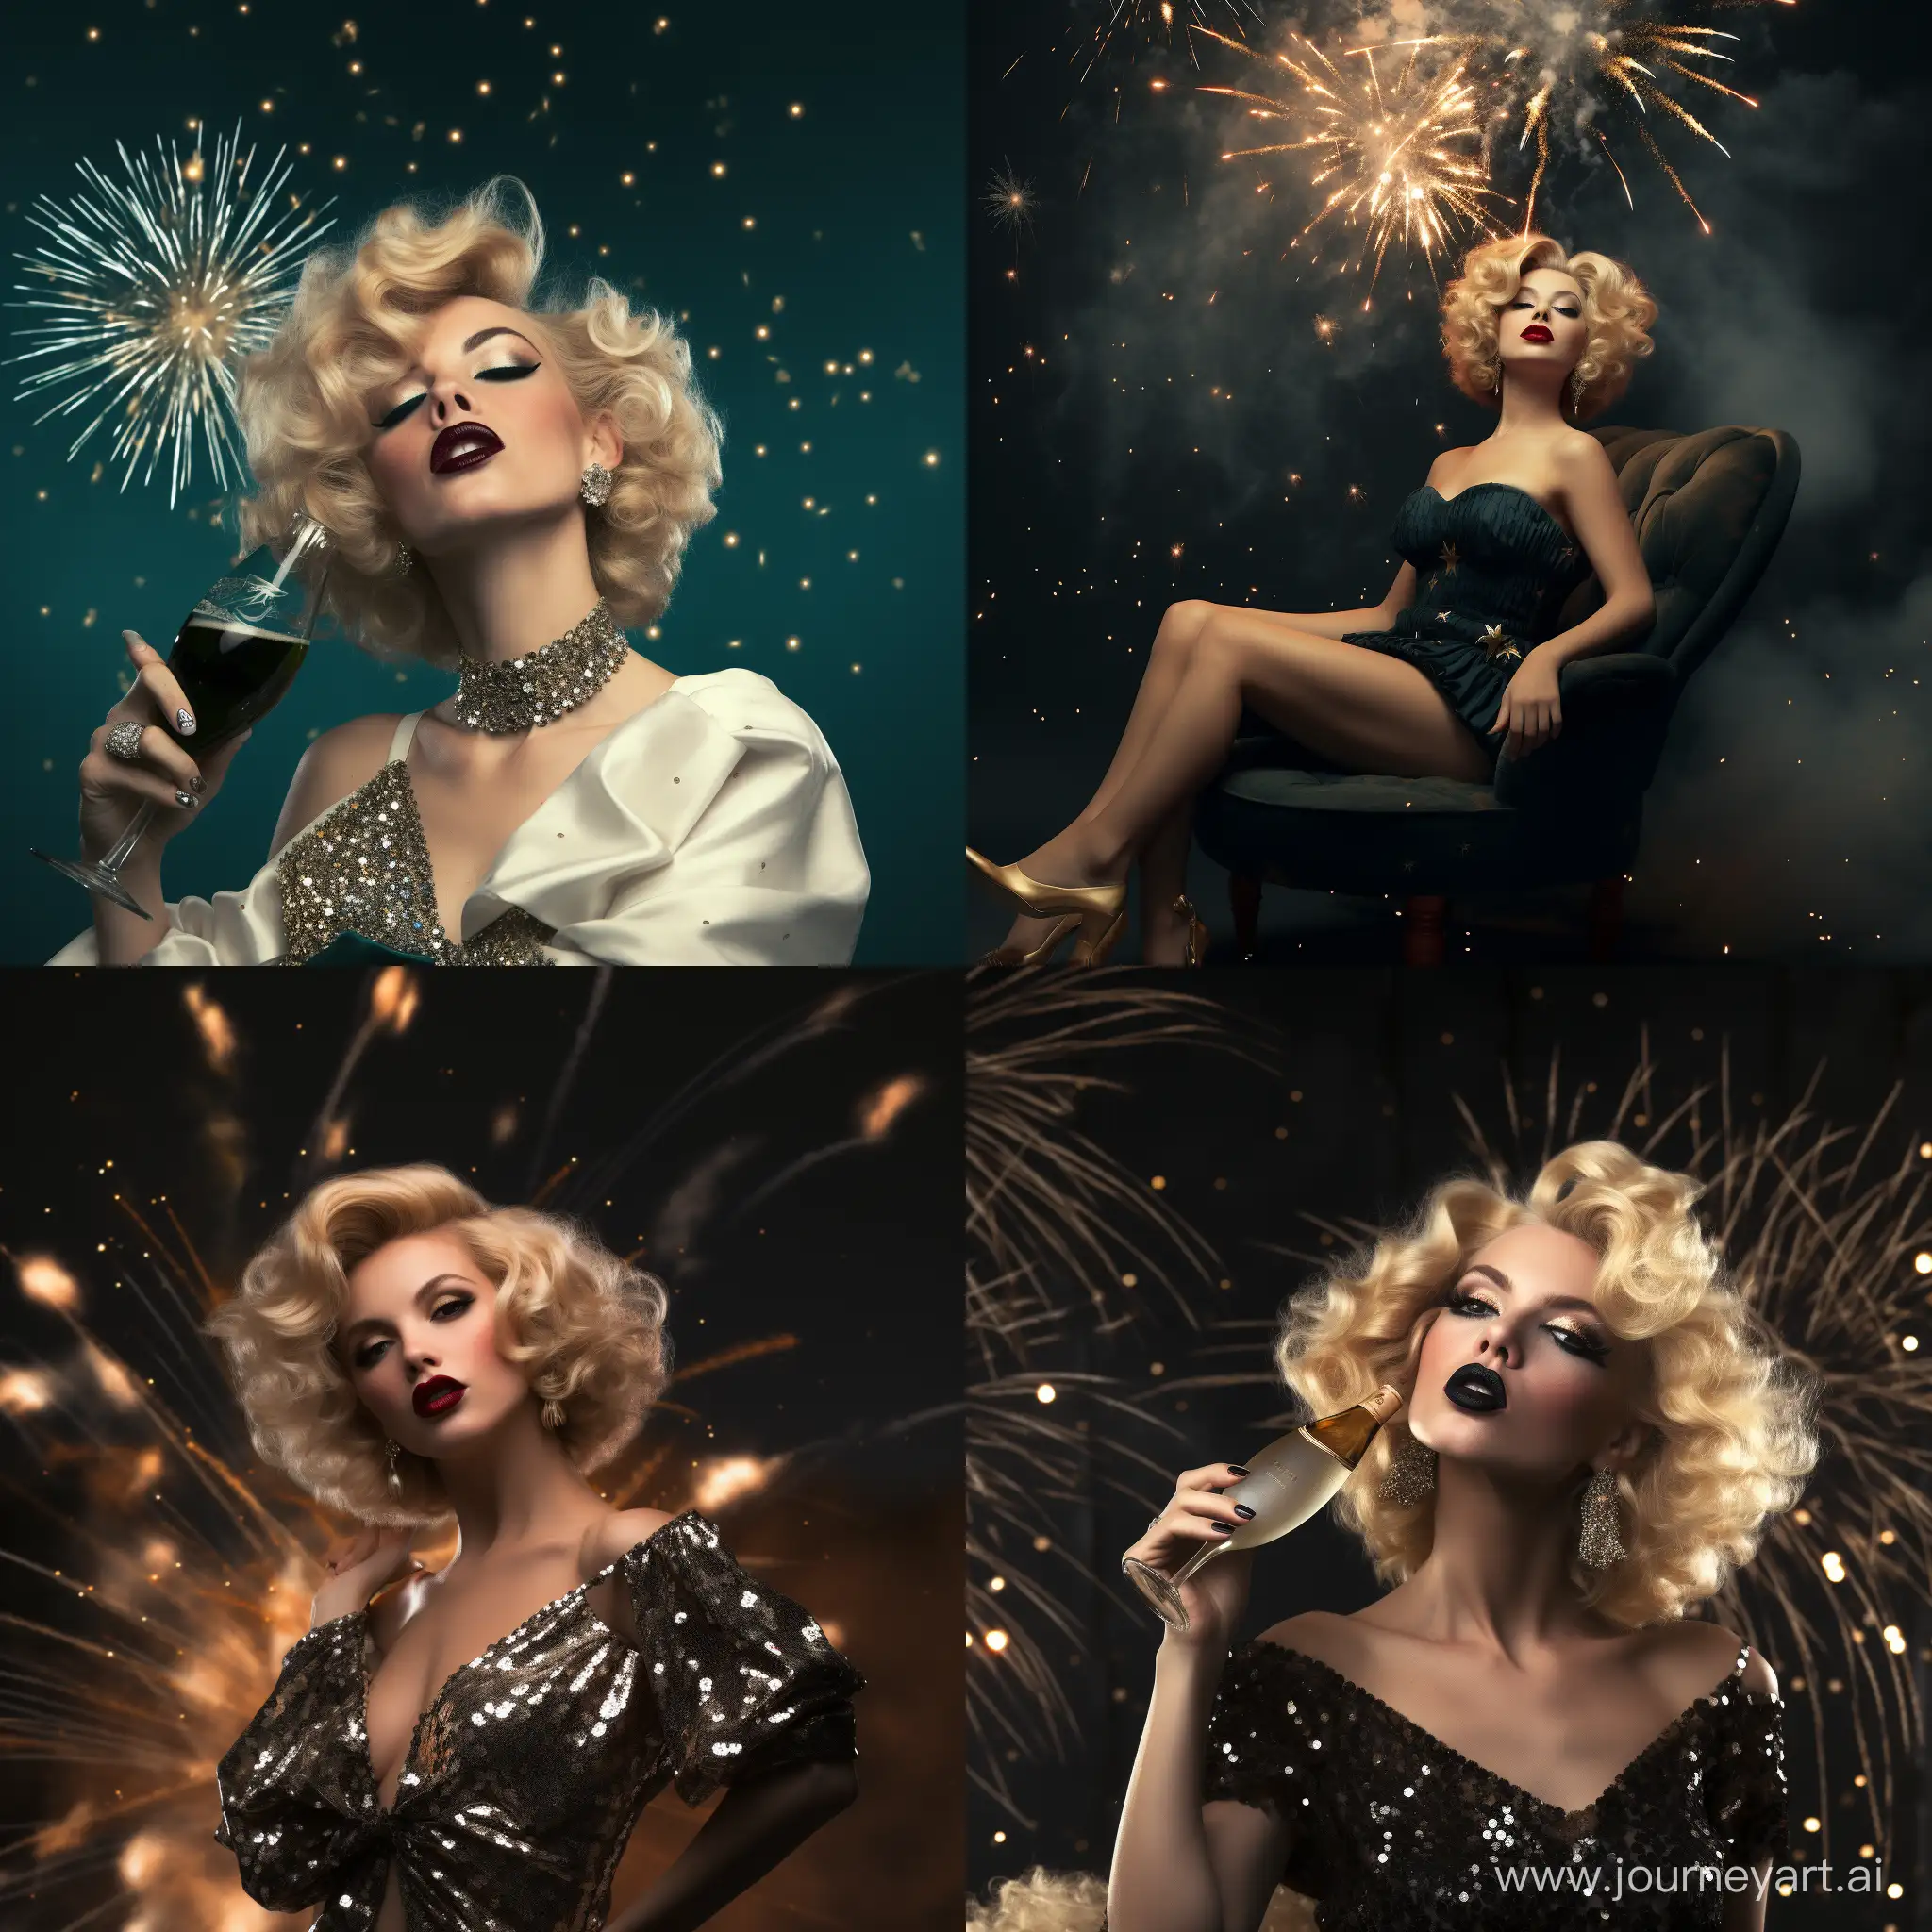 Create Marilyn Monroe with end of year outfit, champagne, fireworks, indie, retro, happy, real, photorealistic 